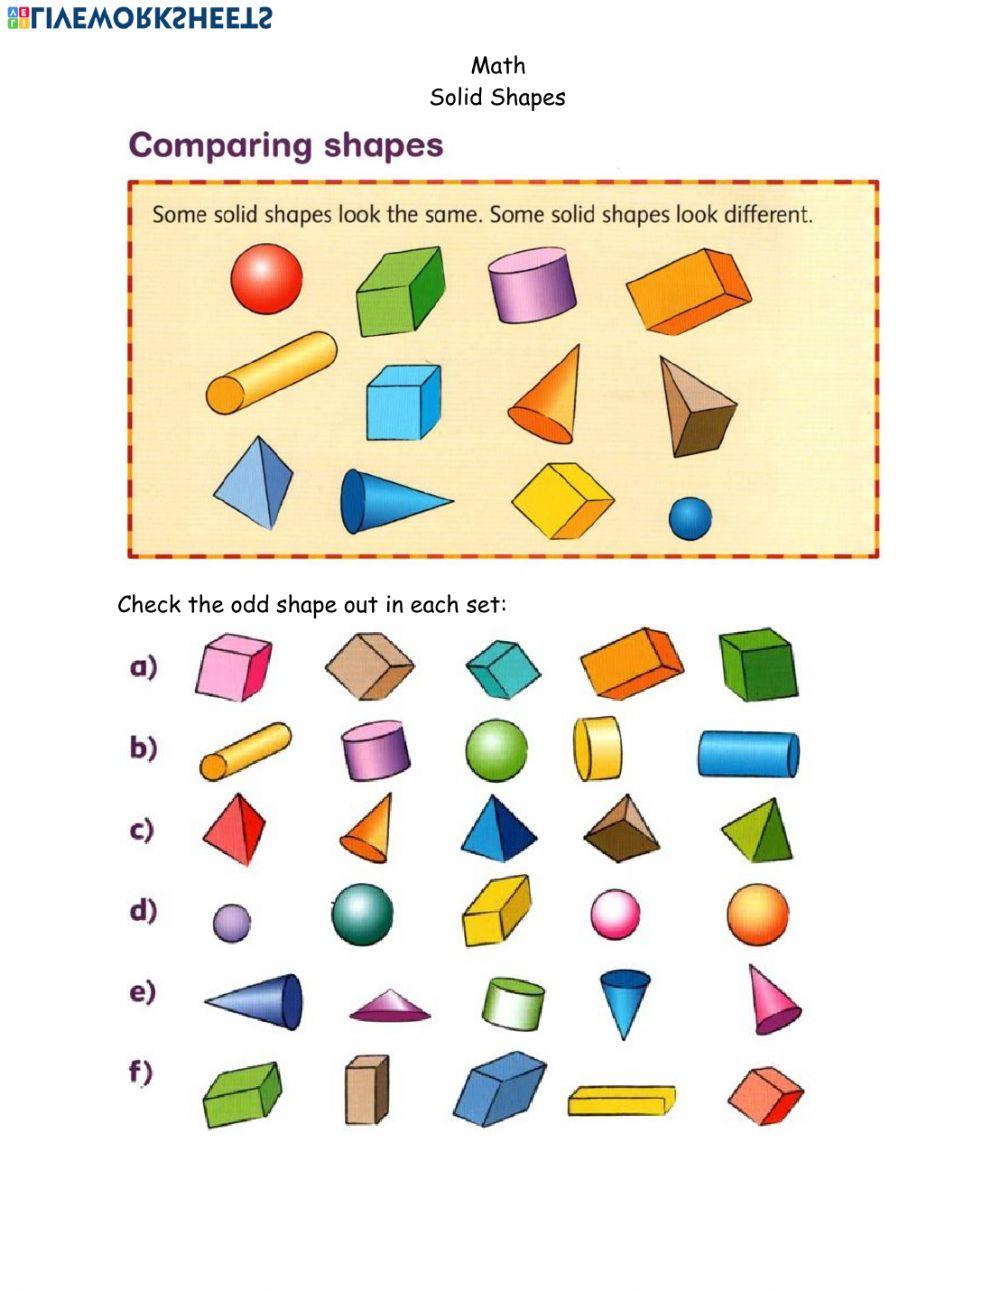 Math page 10 solid shapes April 20